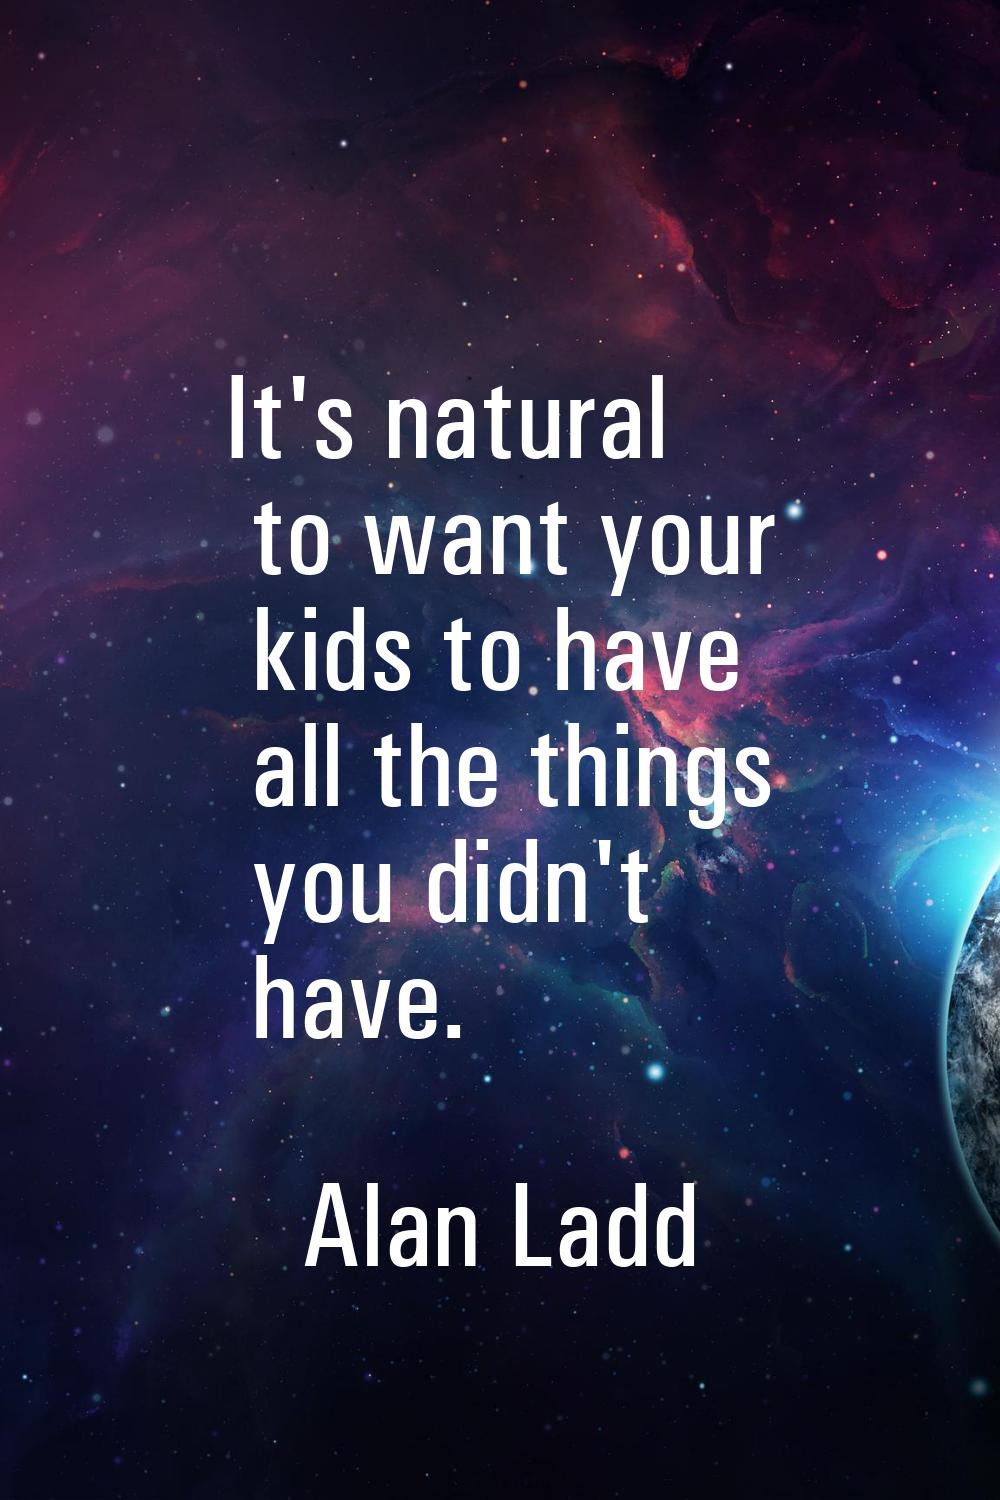 It's natural to want your kids to have all the things you didn't have.